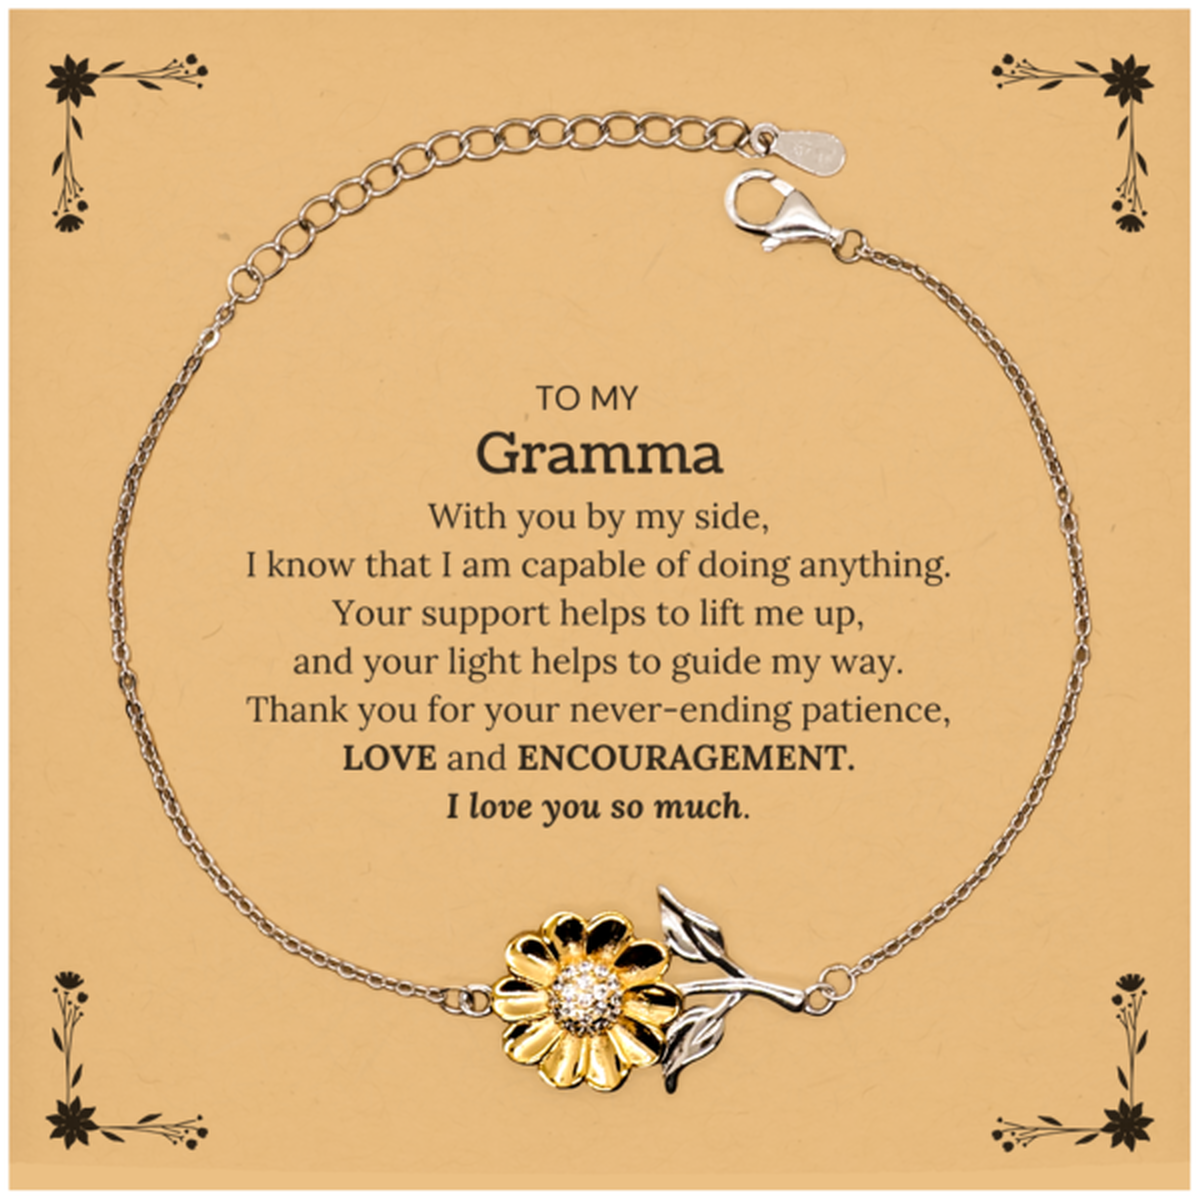 Appreciation Gramma Sunflower Bracelet Gifts, To My Gramma Birthday Christmas Wedding Keepsake Gifts for Gramma With you by my side, I know that I am capable of doing anything. I love you so much